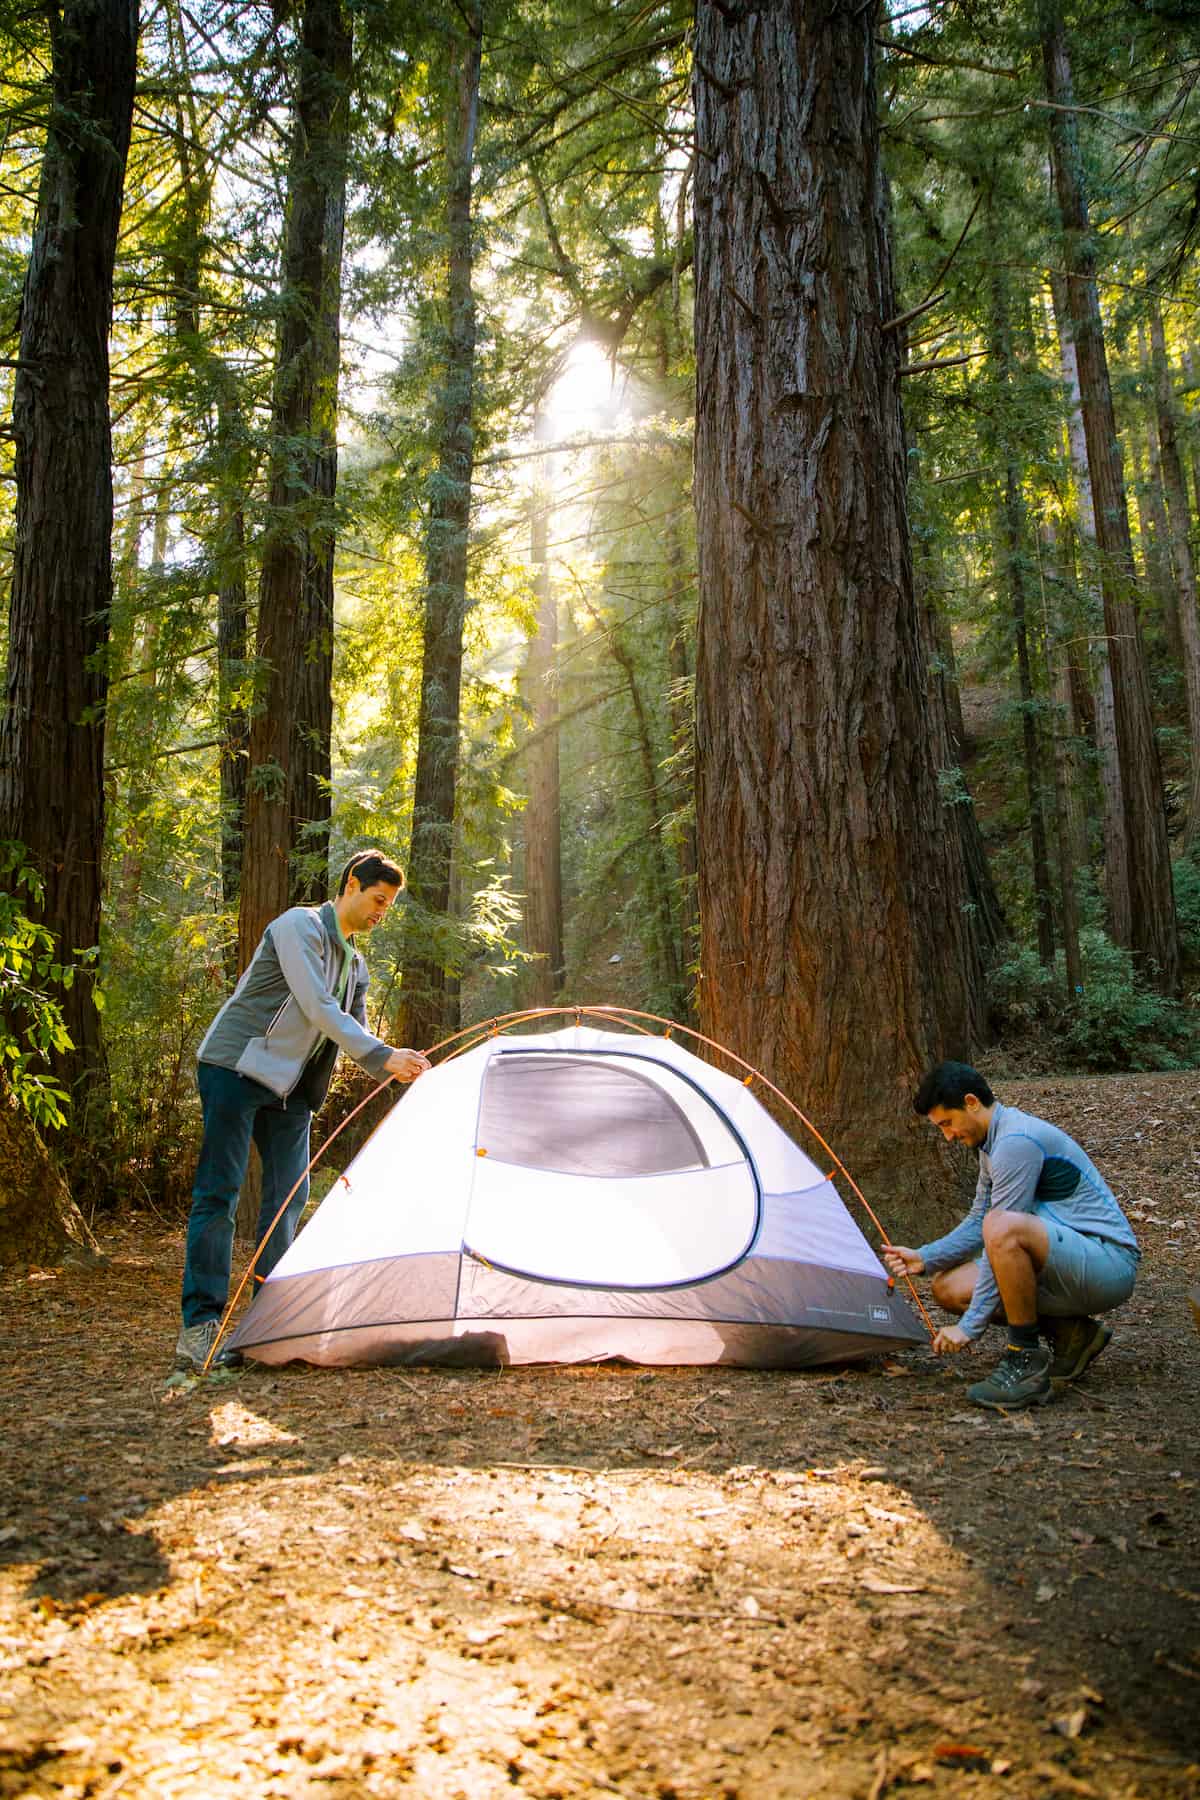 Two young men in athletic clothes put up a camping tent at the base of a second growth redwood tree.